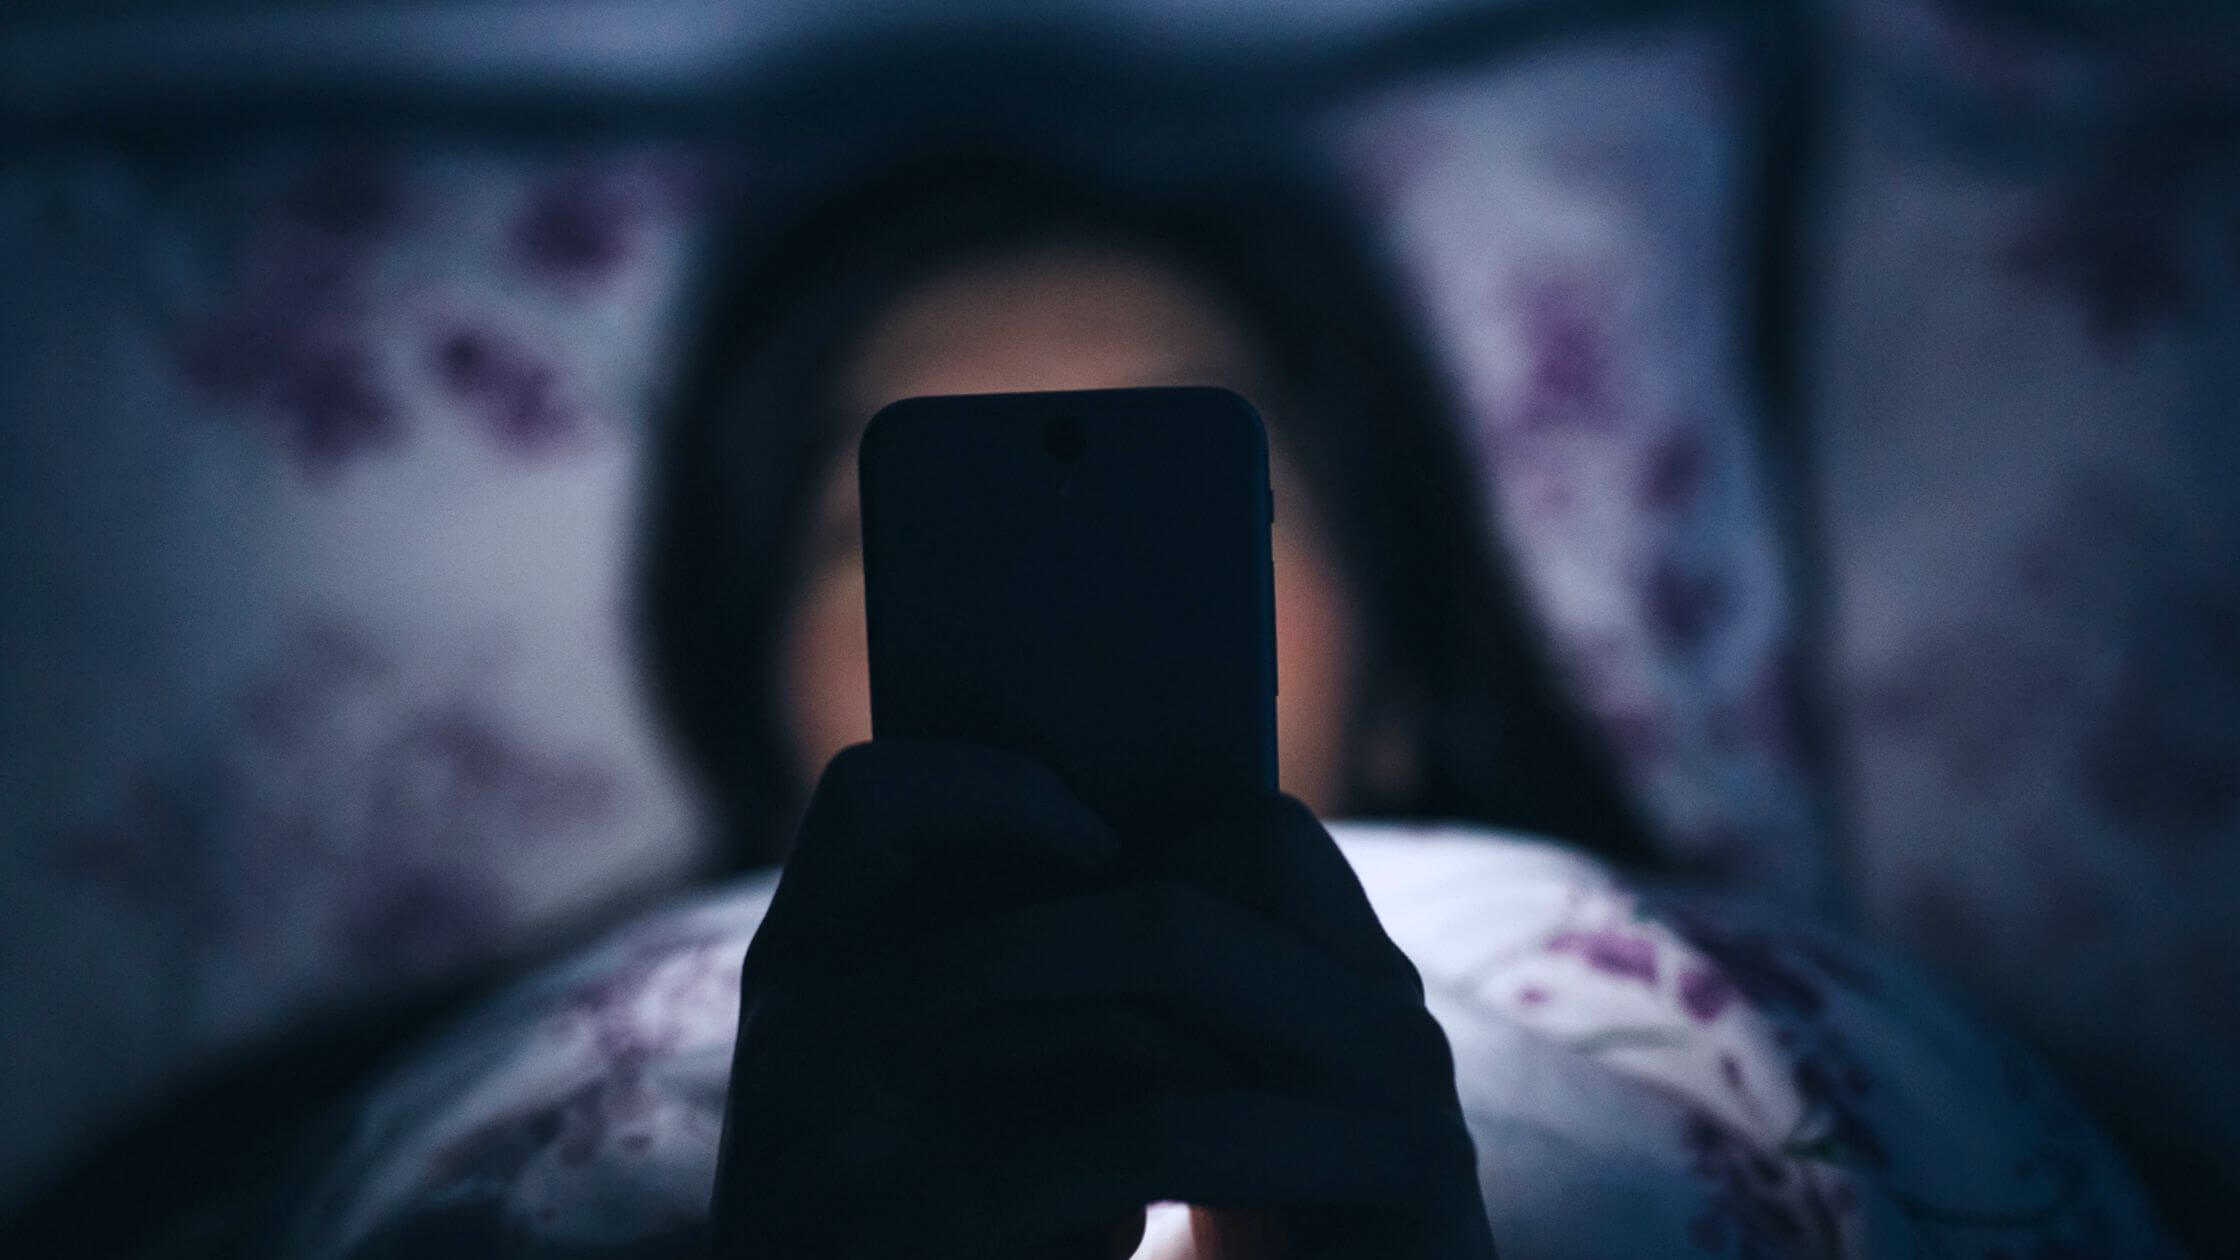 What Are The Health Risks Of Sleeping With Your Phone At Night